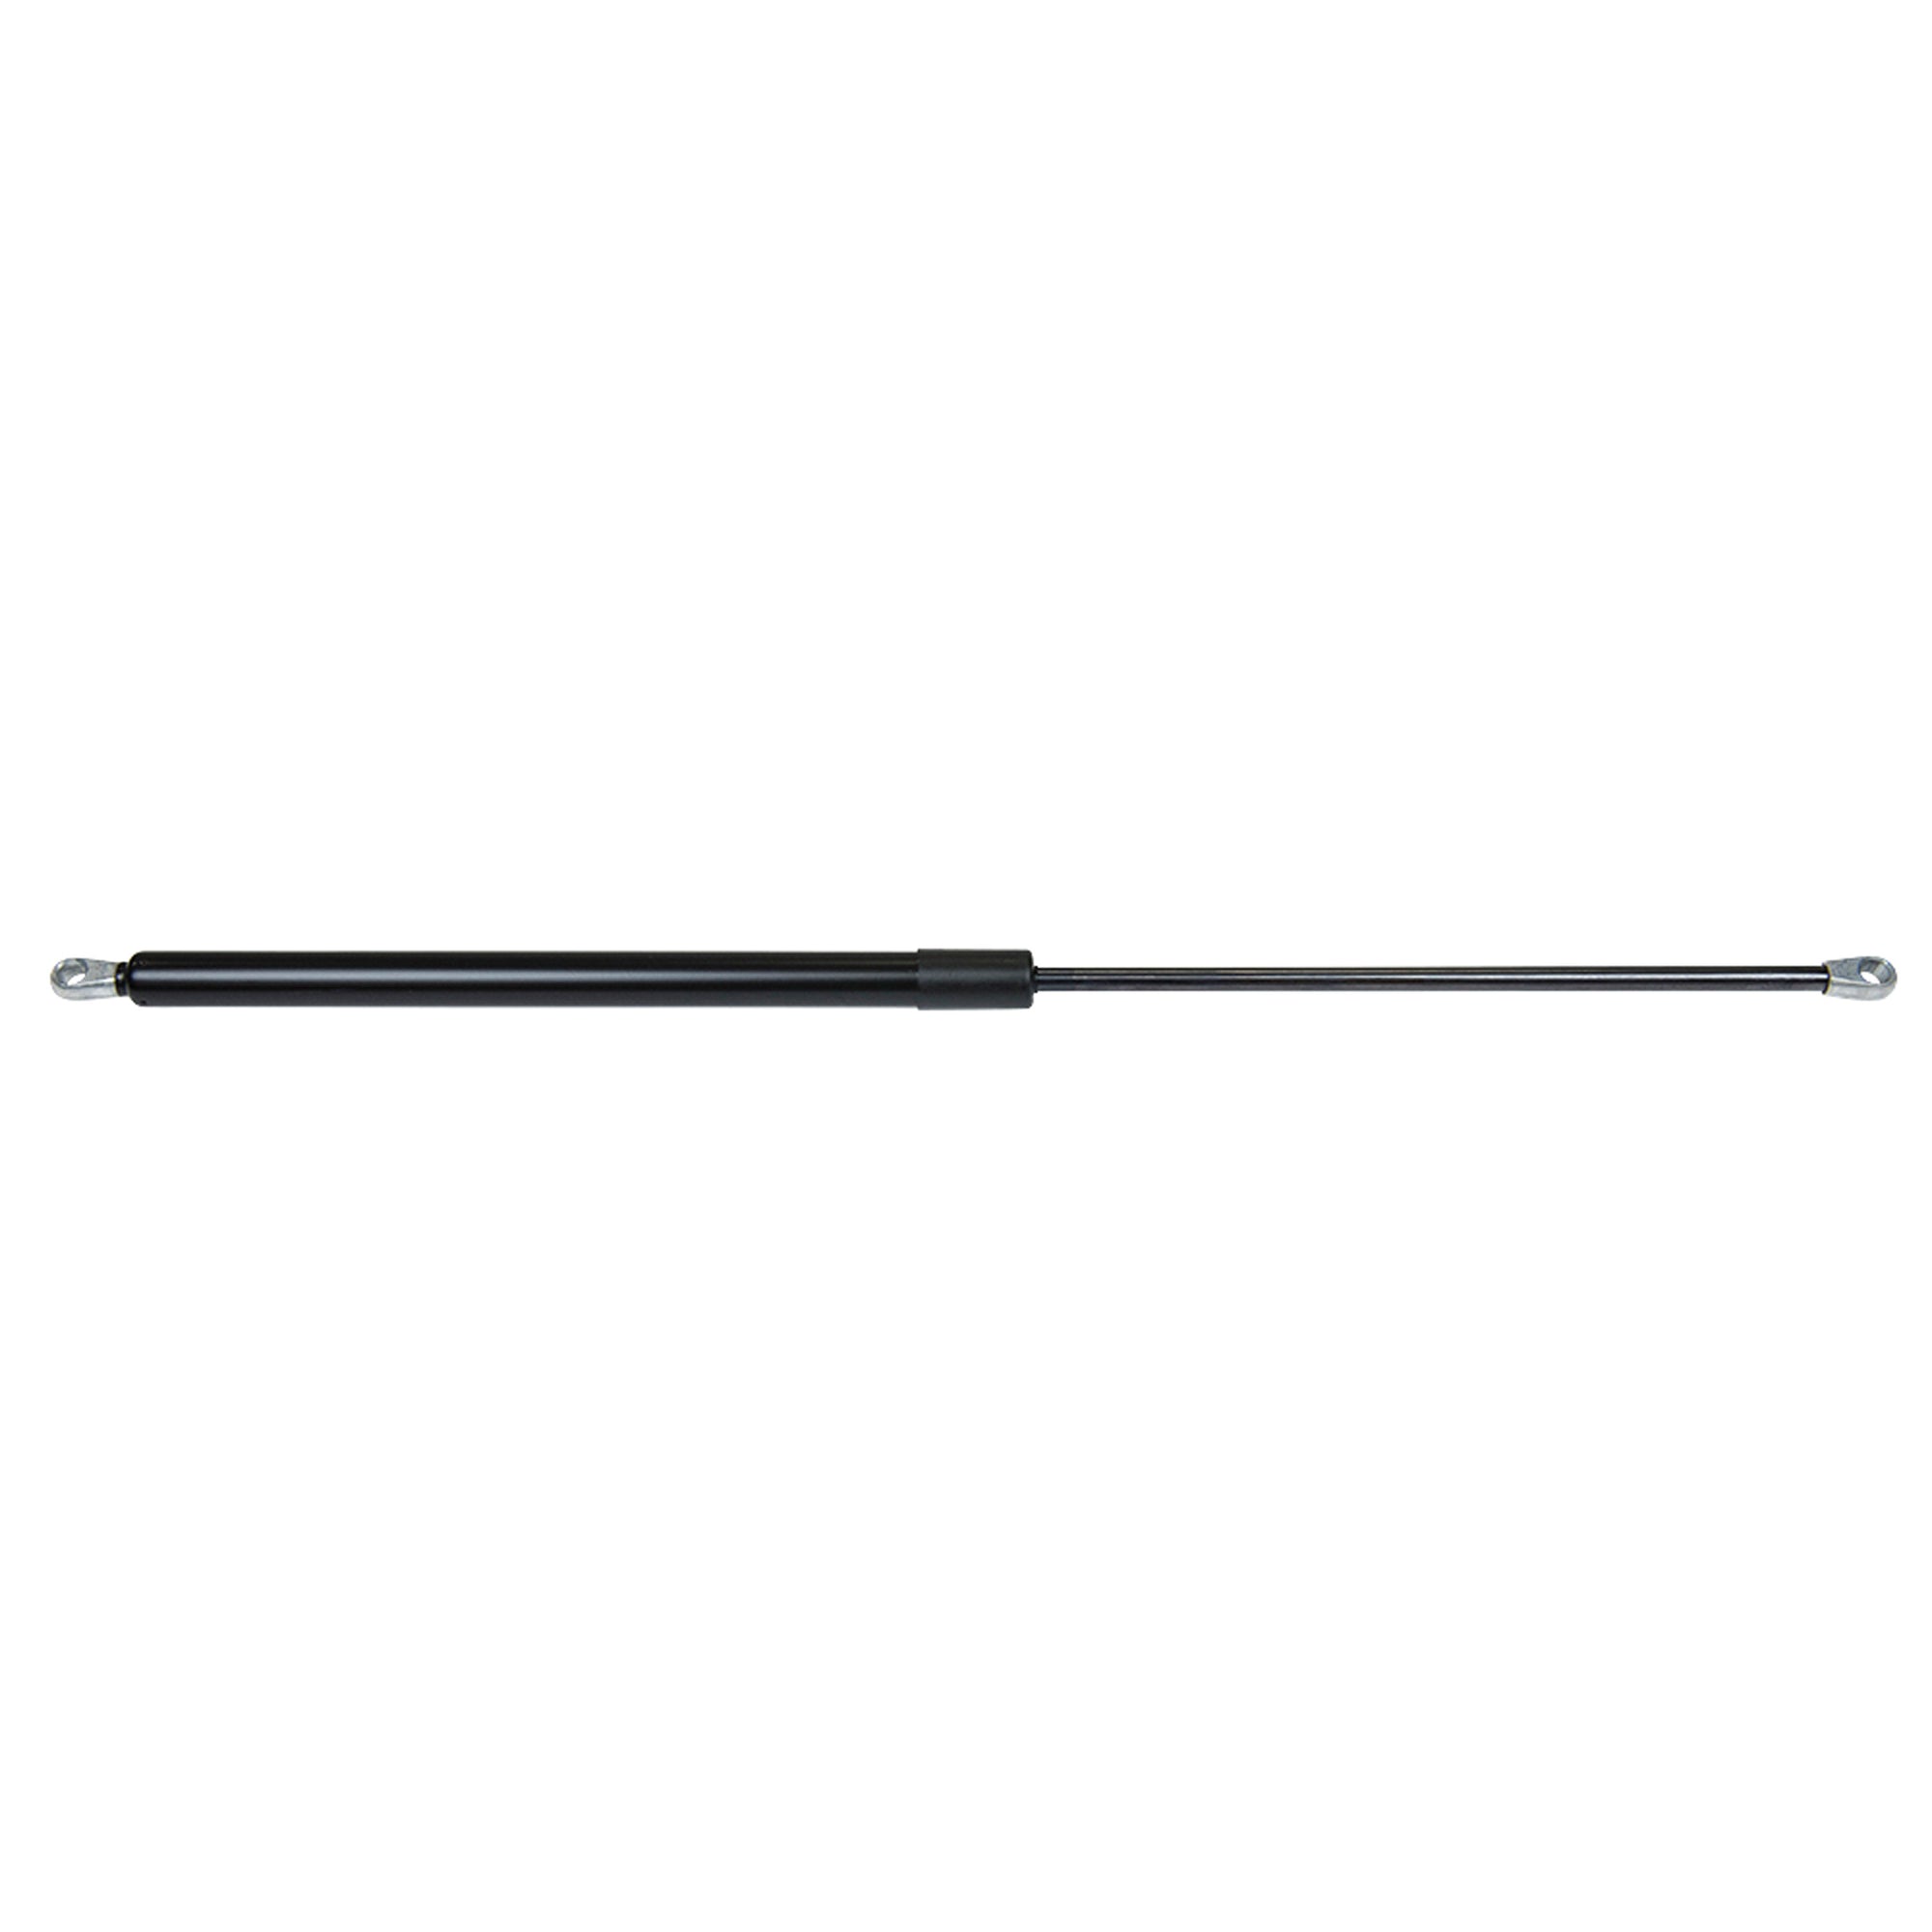 Lippert 280343 Gas Strut for Pitched Awning Arms - 26", Black